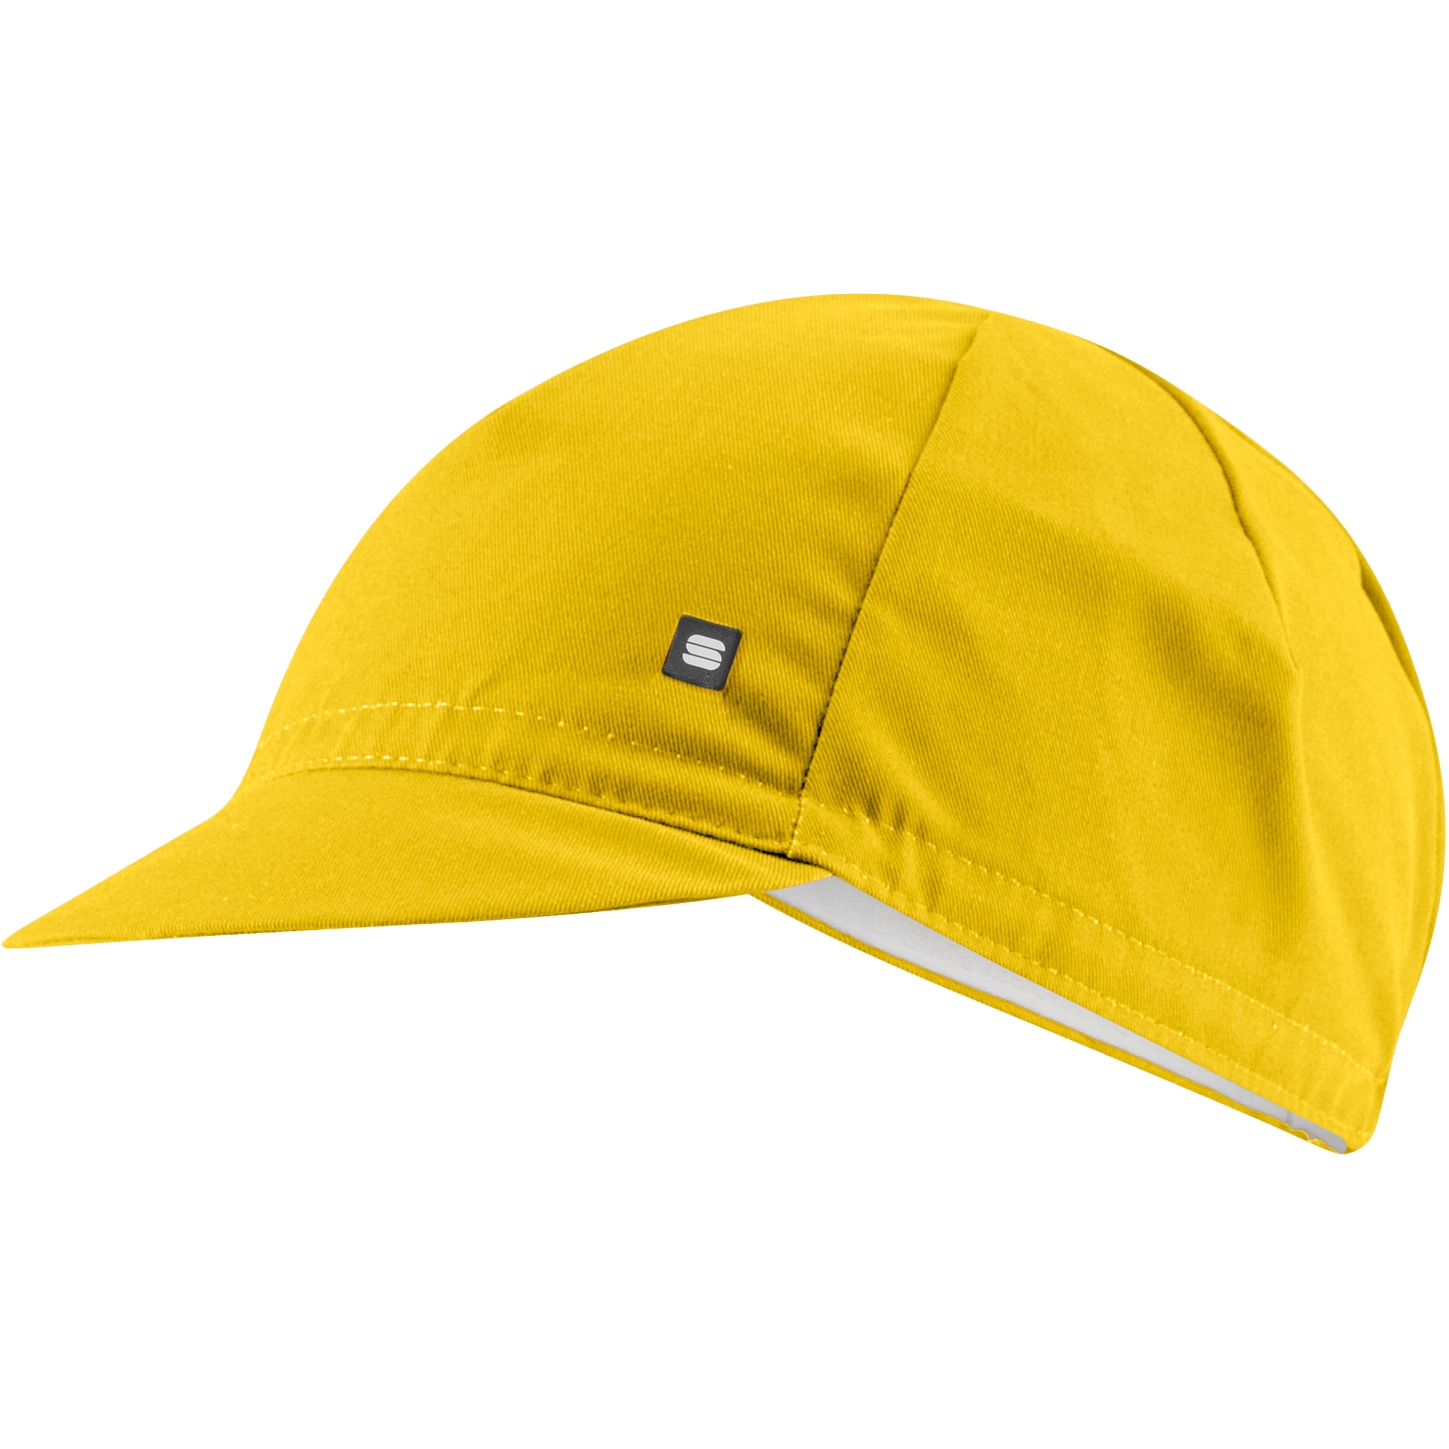 Picture of Sportful Srk Cycling Cap - 753 High Visibility